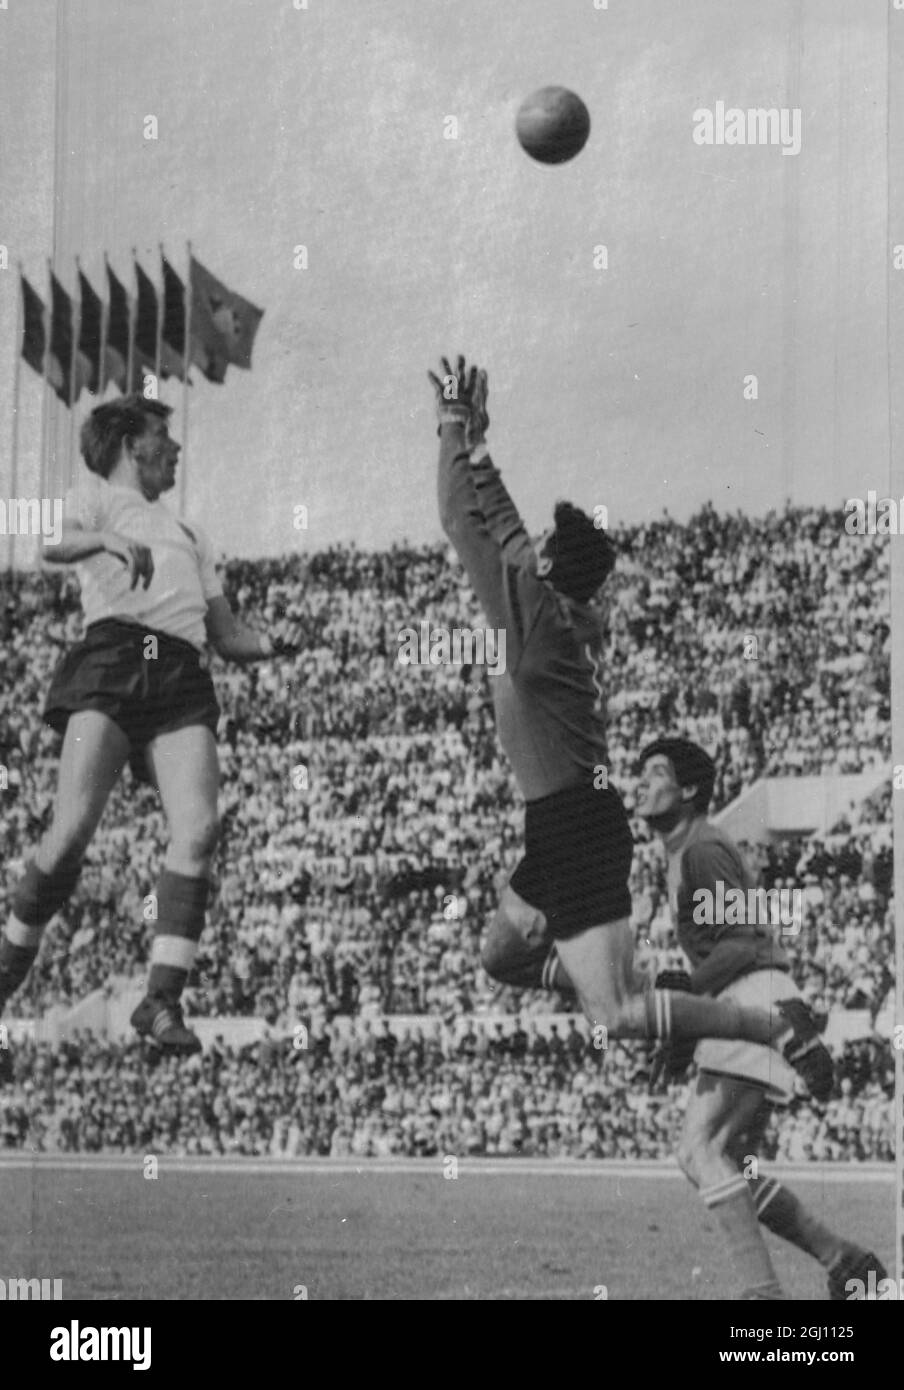 FOOTBALLER GERRY HITCHENS IN ROME DURING ENGLAND v ITALY FOOTBALL MATCH - 24 MAY 1961 Stock Photo